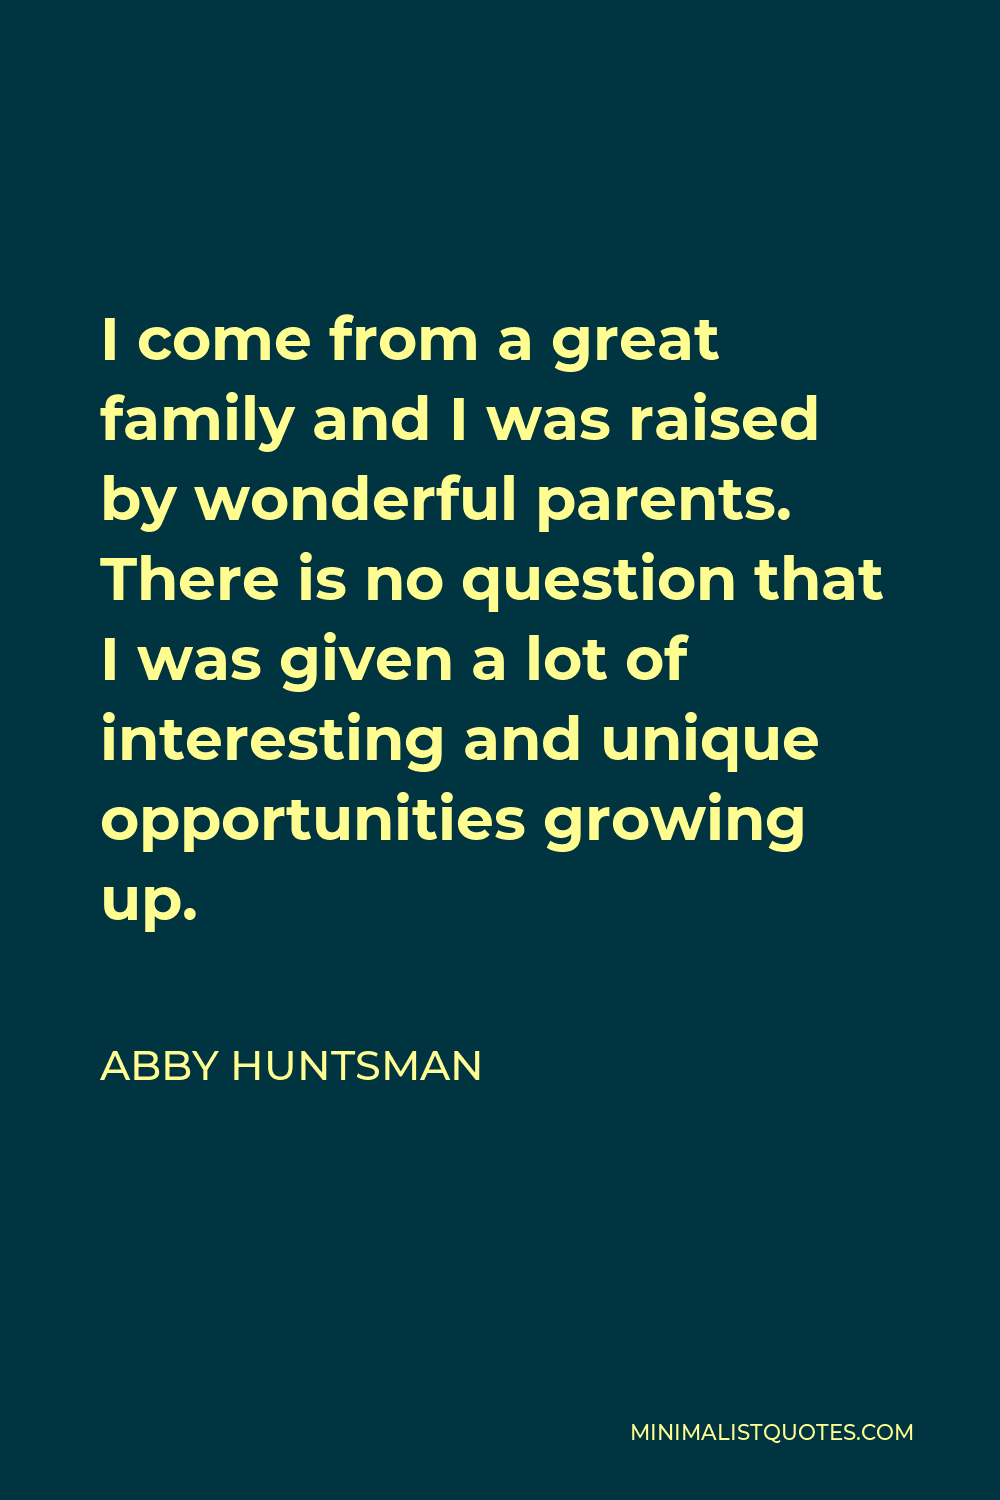 Abby Huntsman Quote - I come from a great family and I was raised by wonderful parents. There is no question that I was given a lot of interesting and unique opportunities growing up.